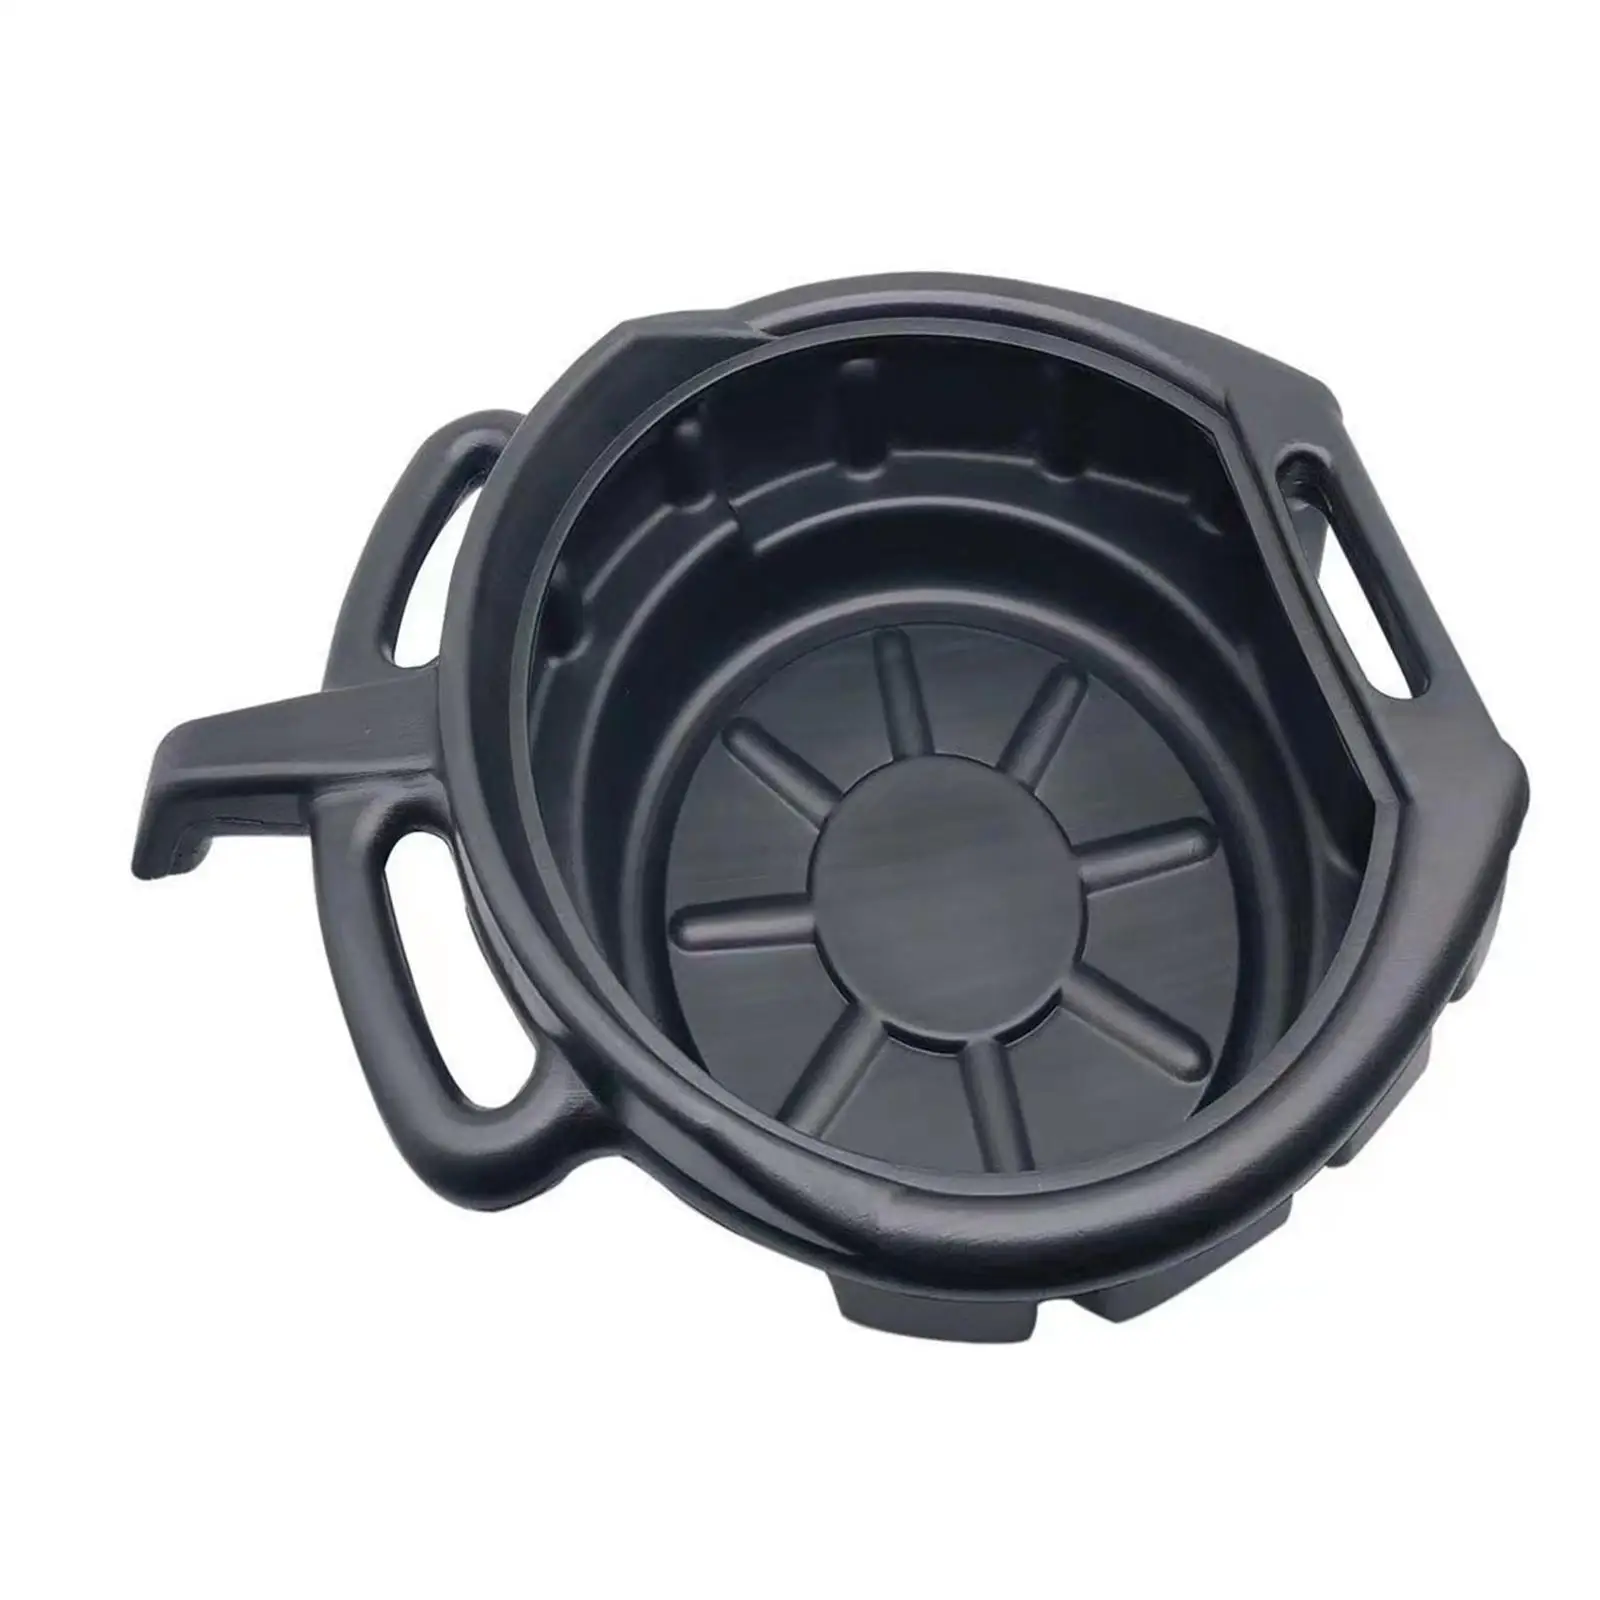 Oil Drain Container Can Tray Waste Engine Oil Collector Leak Large Capacity Drain Pan Accesories for Car Fuel Fluid Garage